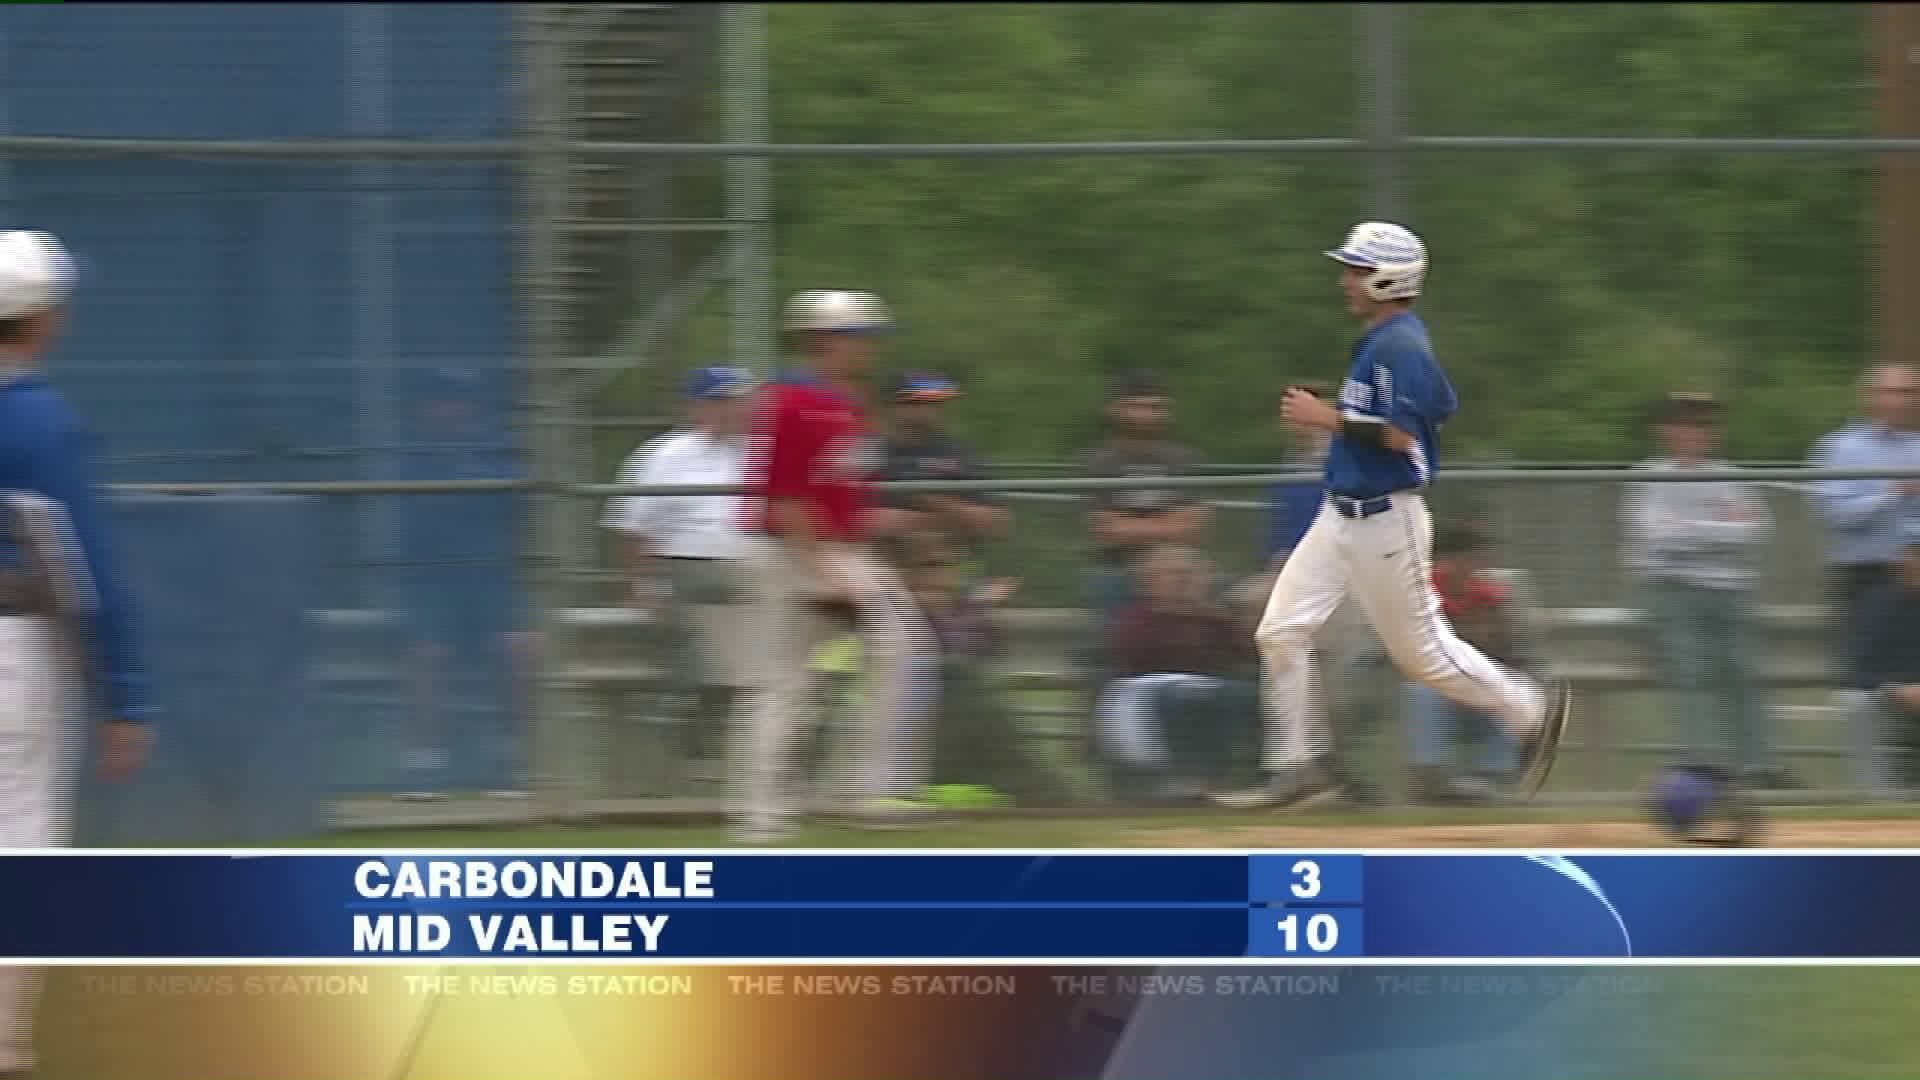 Carbondale vs Mid Valley baseball